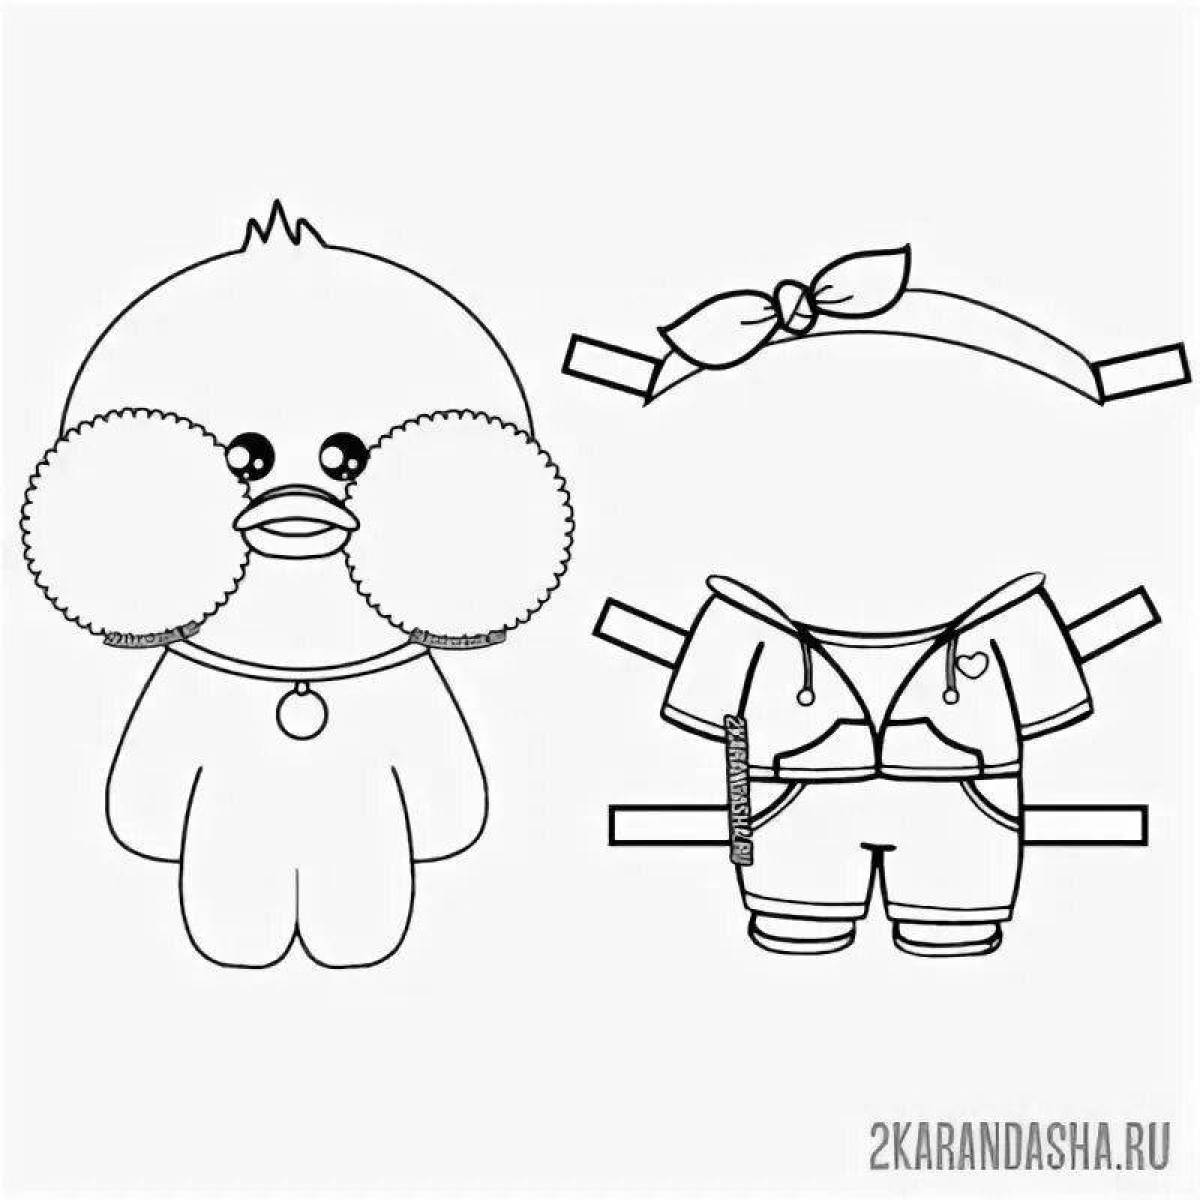 Lalafanfan duck coloring page with clothes